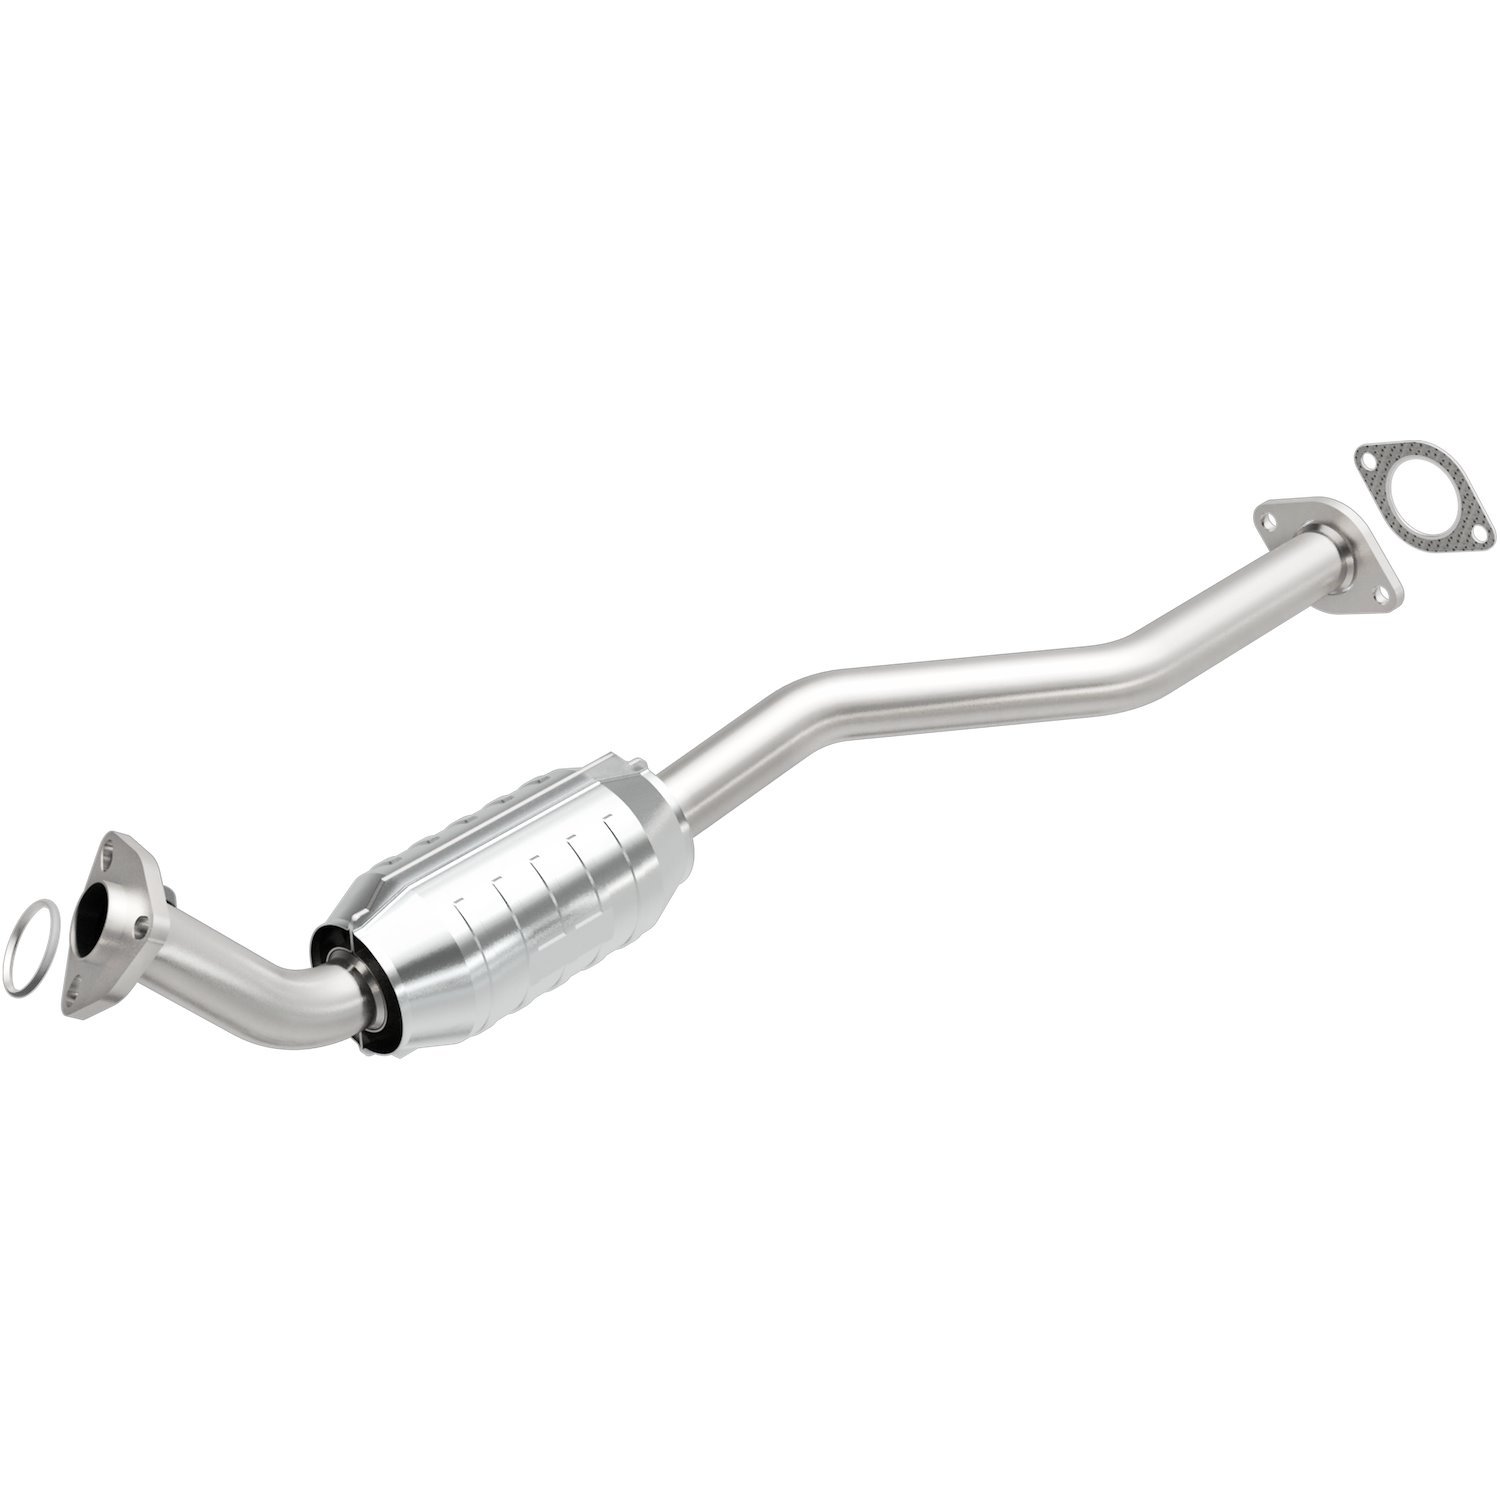 HM Grade Federal / EPA Compliant Direct-Fit Catalytic Converter 93225